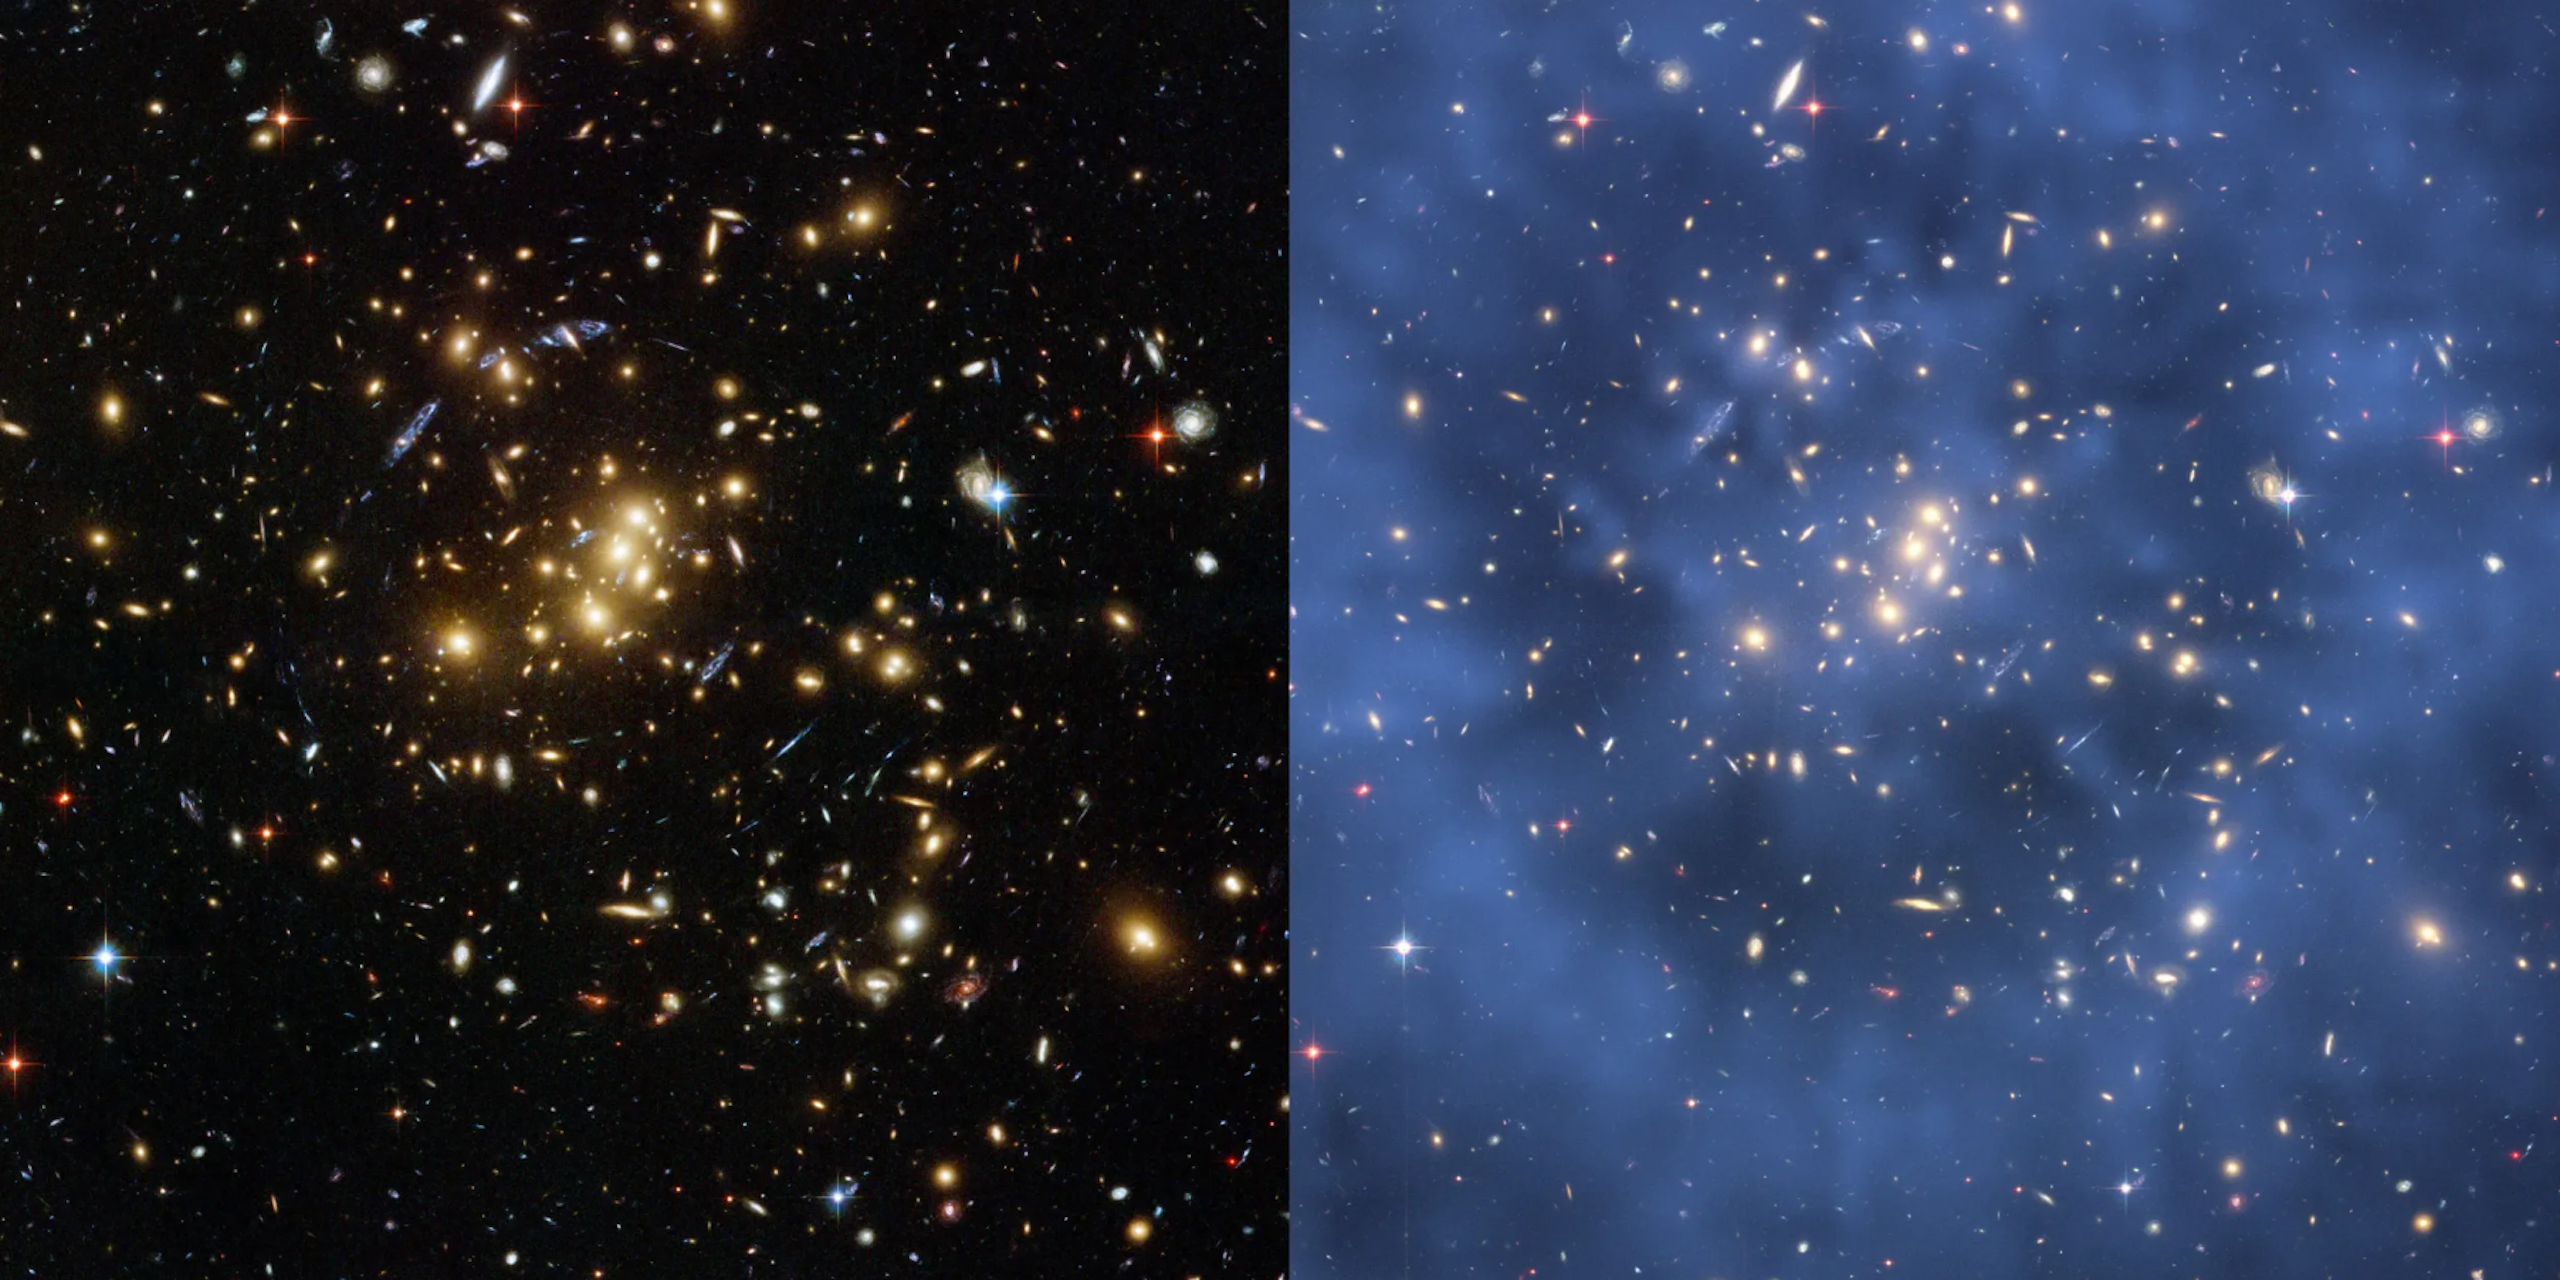 Galaxy cluster, left, with ring of dark matter visible, right.